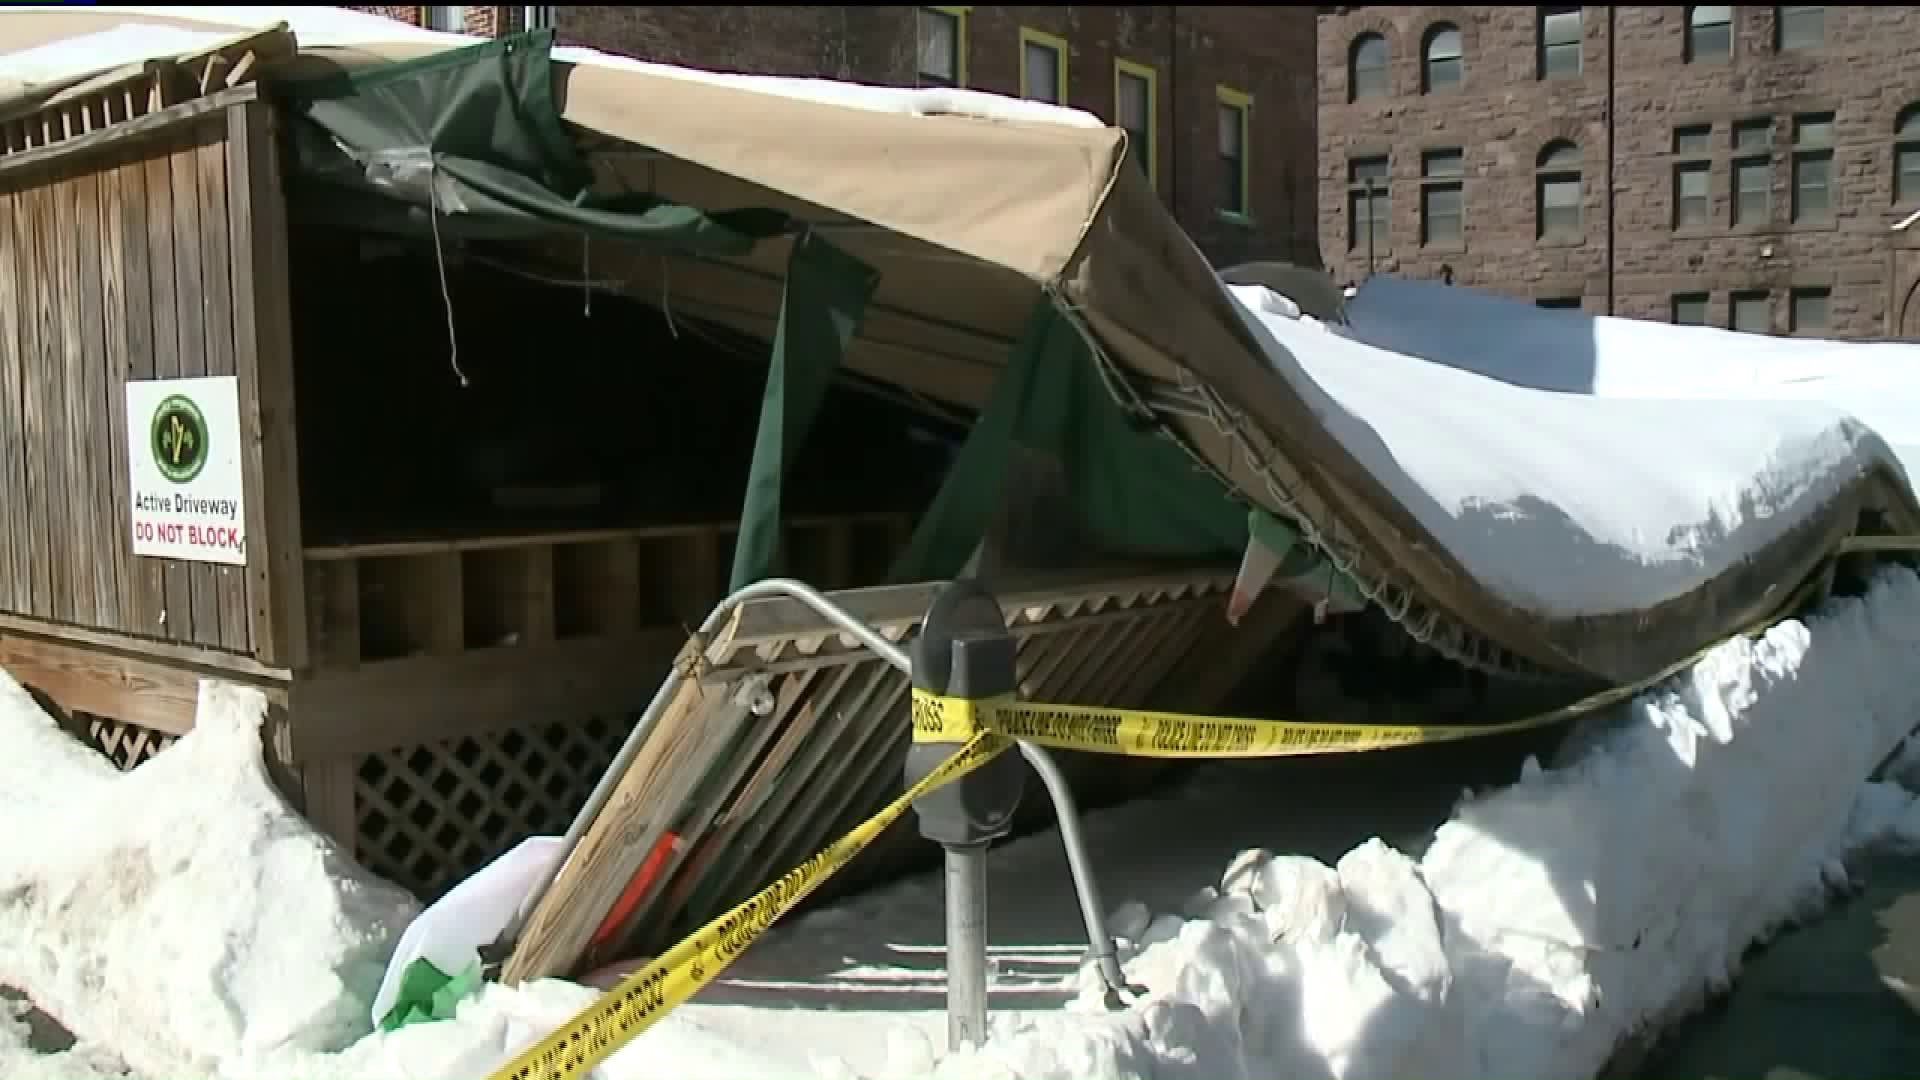 Blizzard Damages Part of a Bar in Carbon County